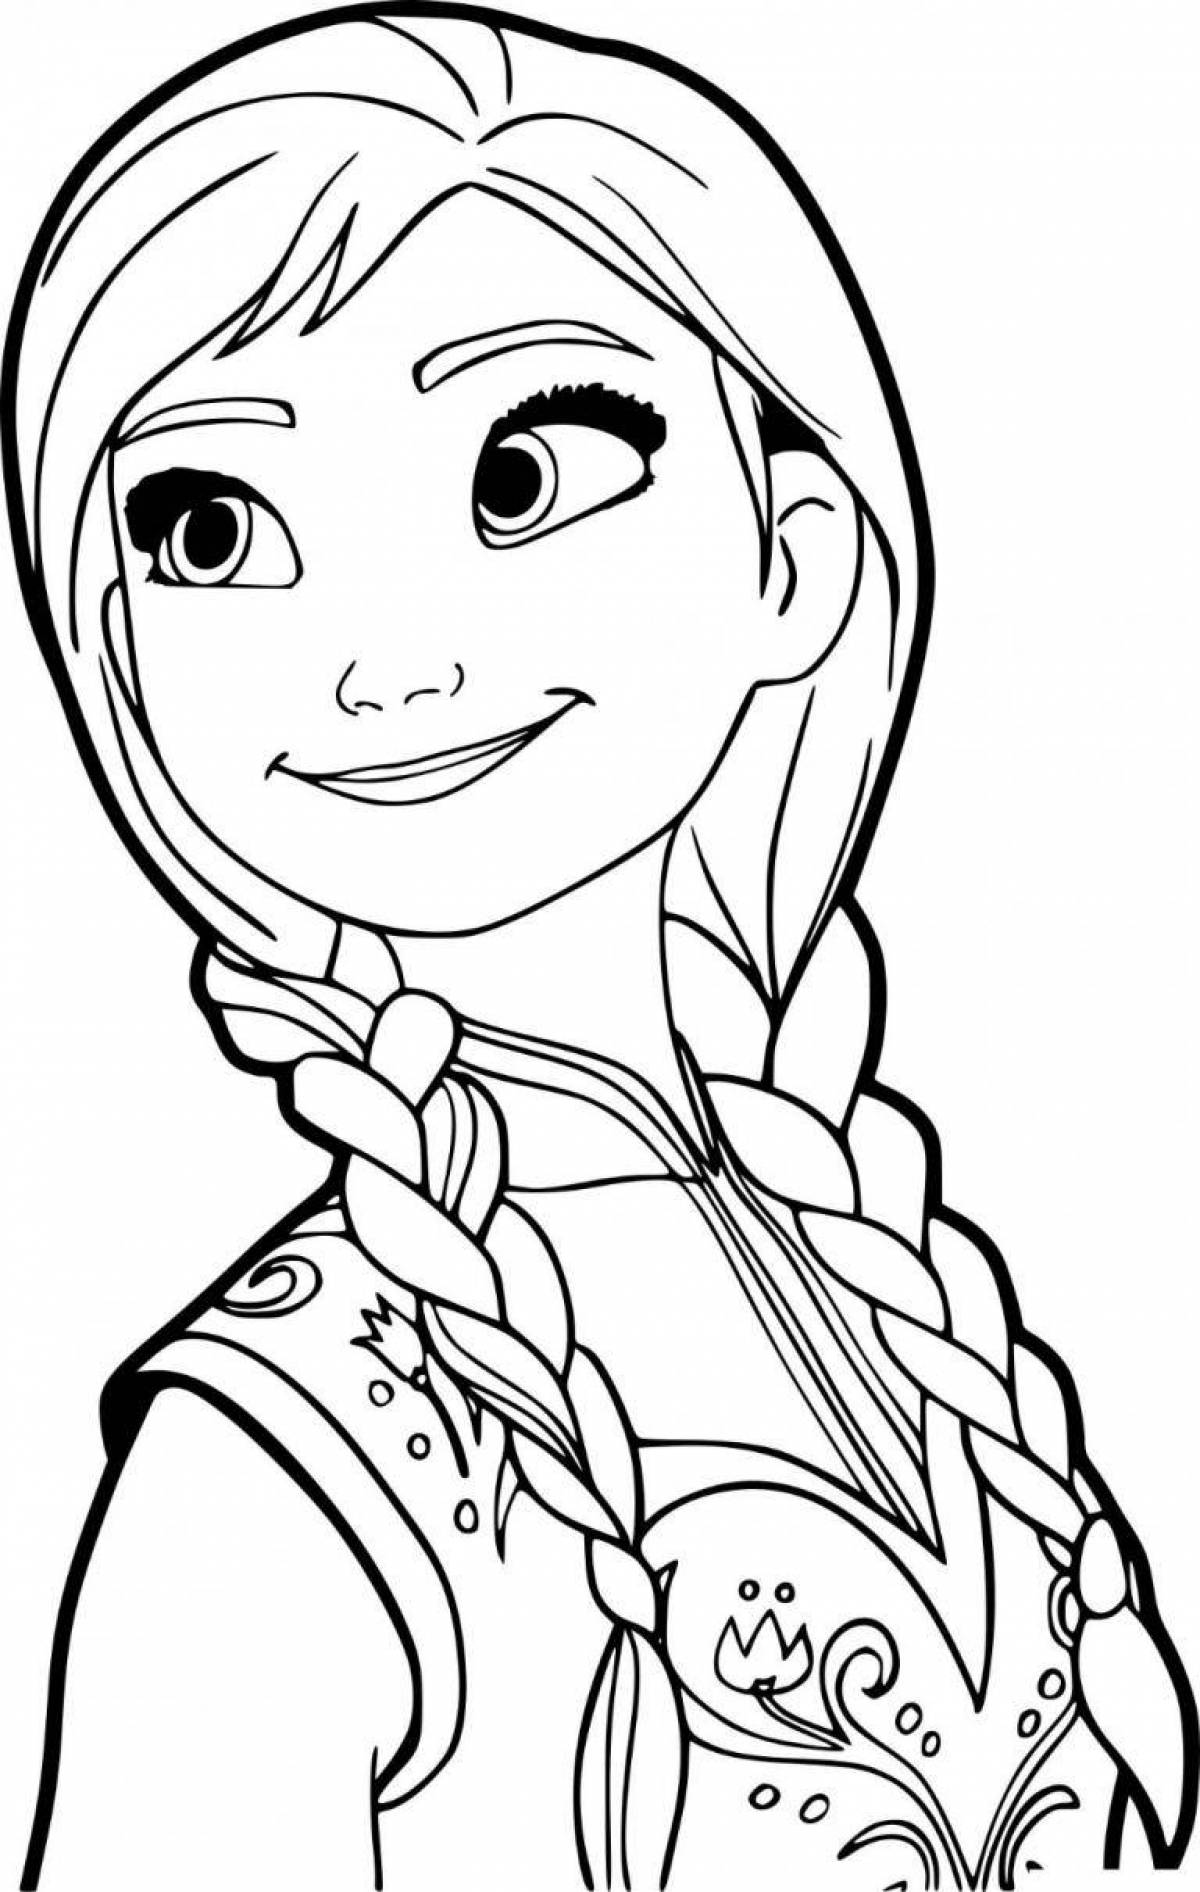 Whimsical Frozen coloring book for 5-6 year olds